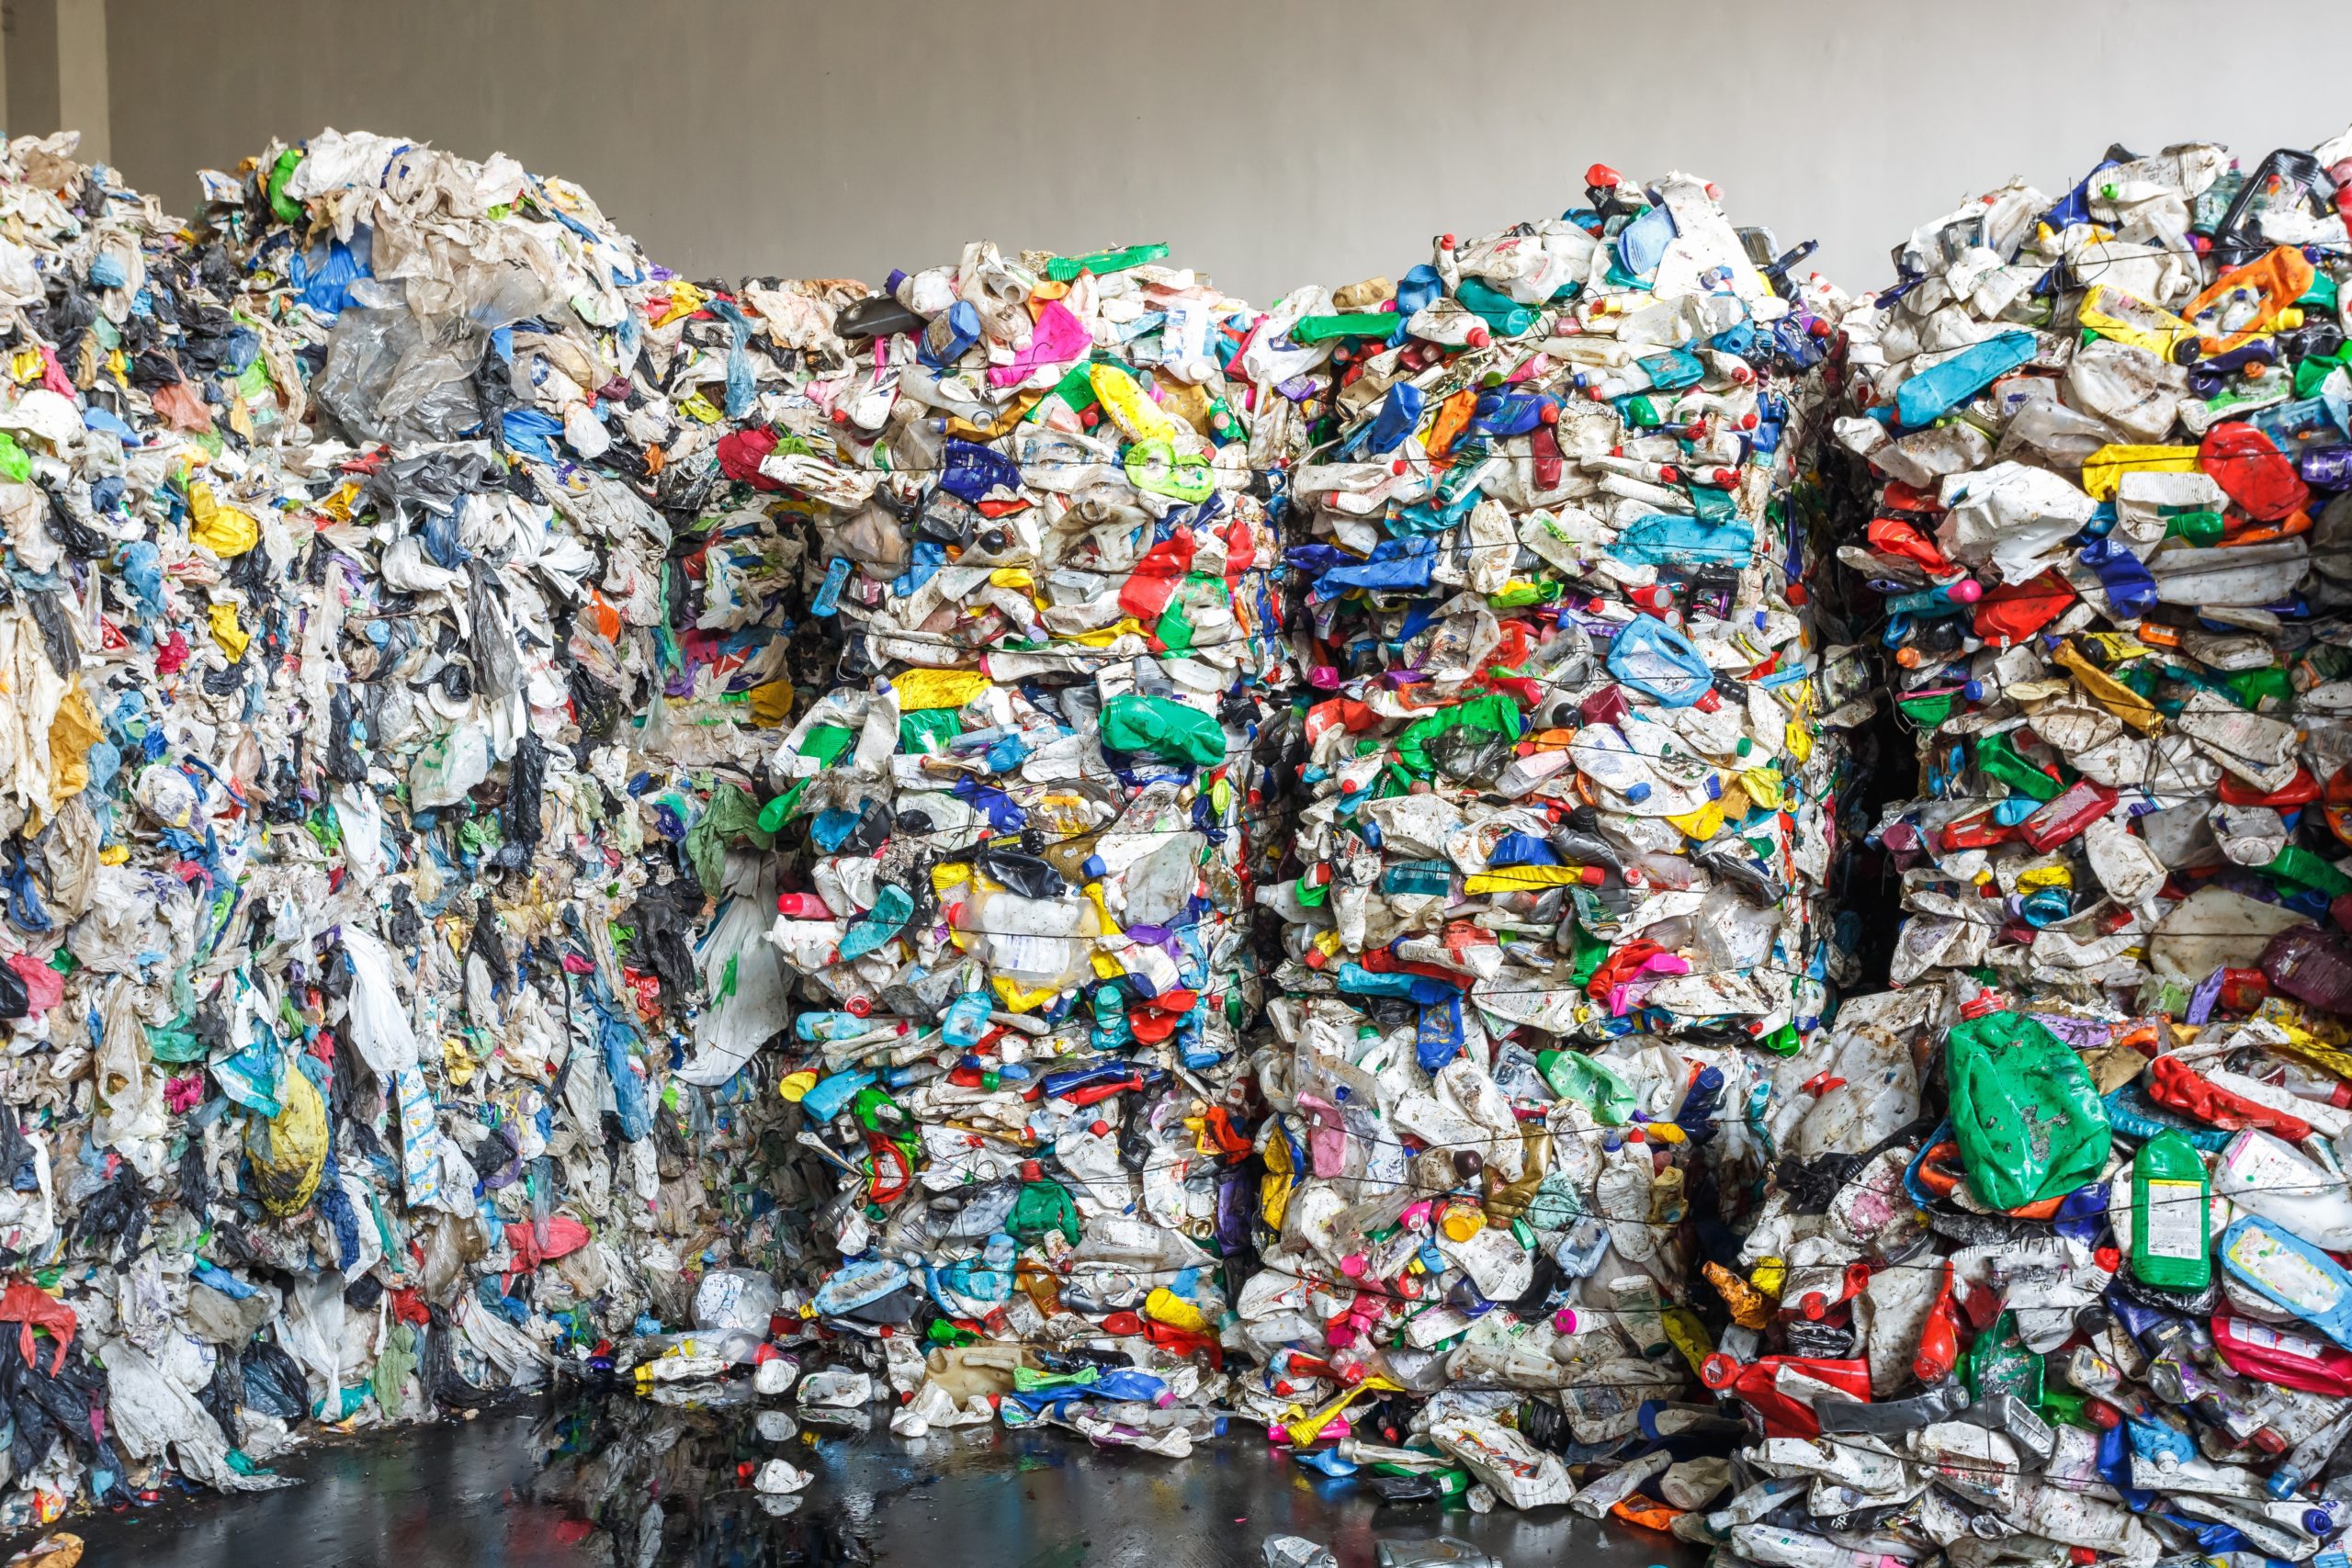 How to recycle any plastic … article by the BBC